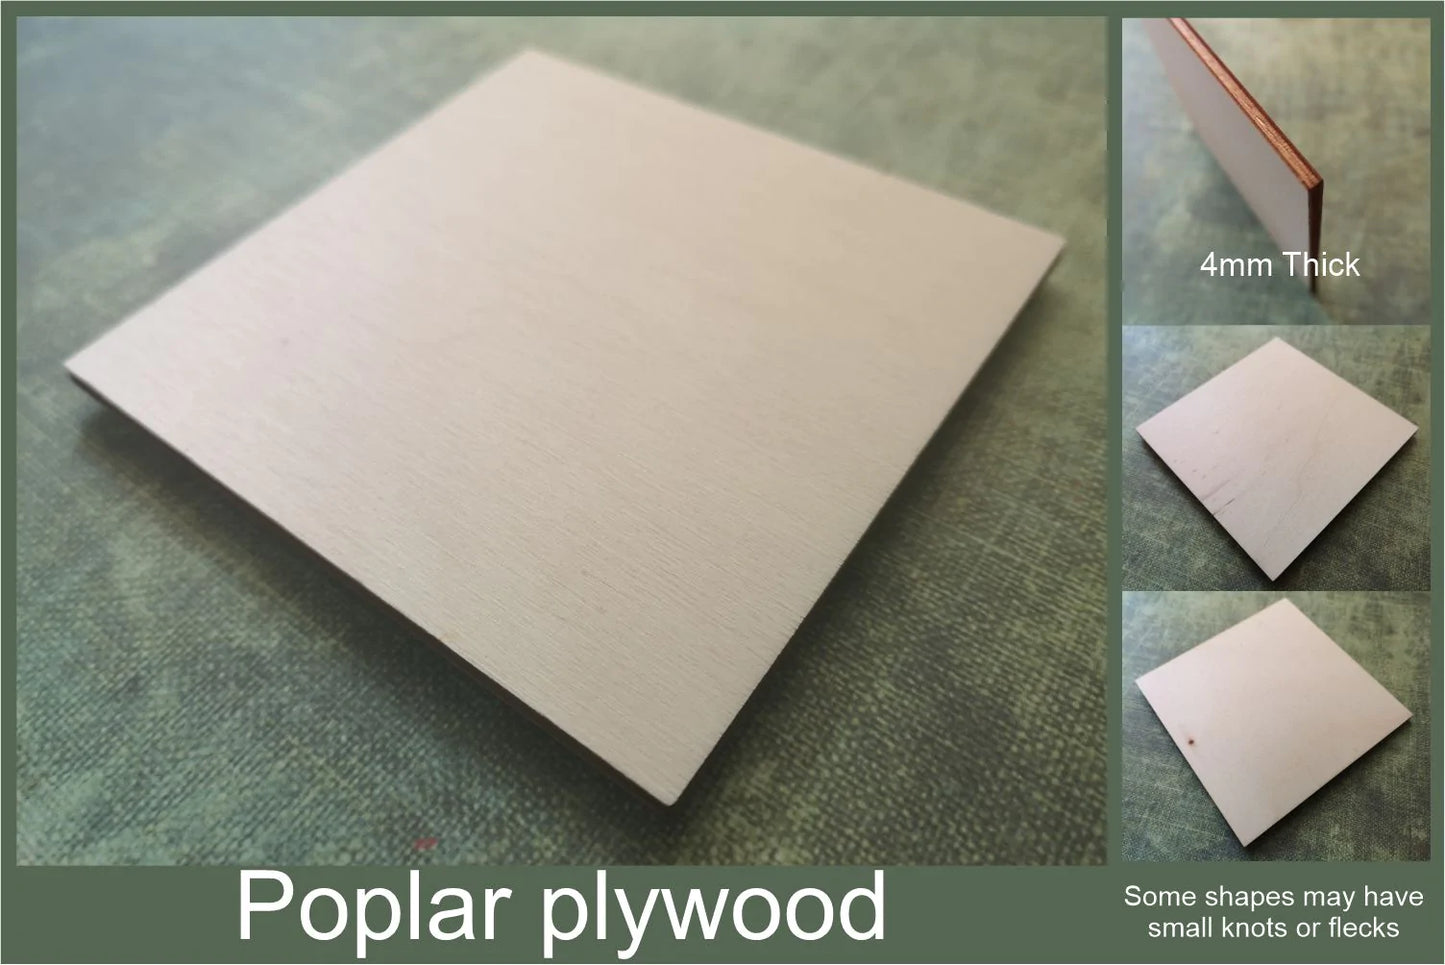 4mm thick poplar plywood used to make the Husky cut-outs ready for crafting